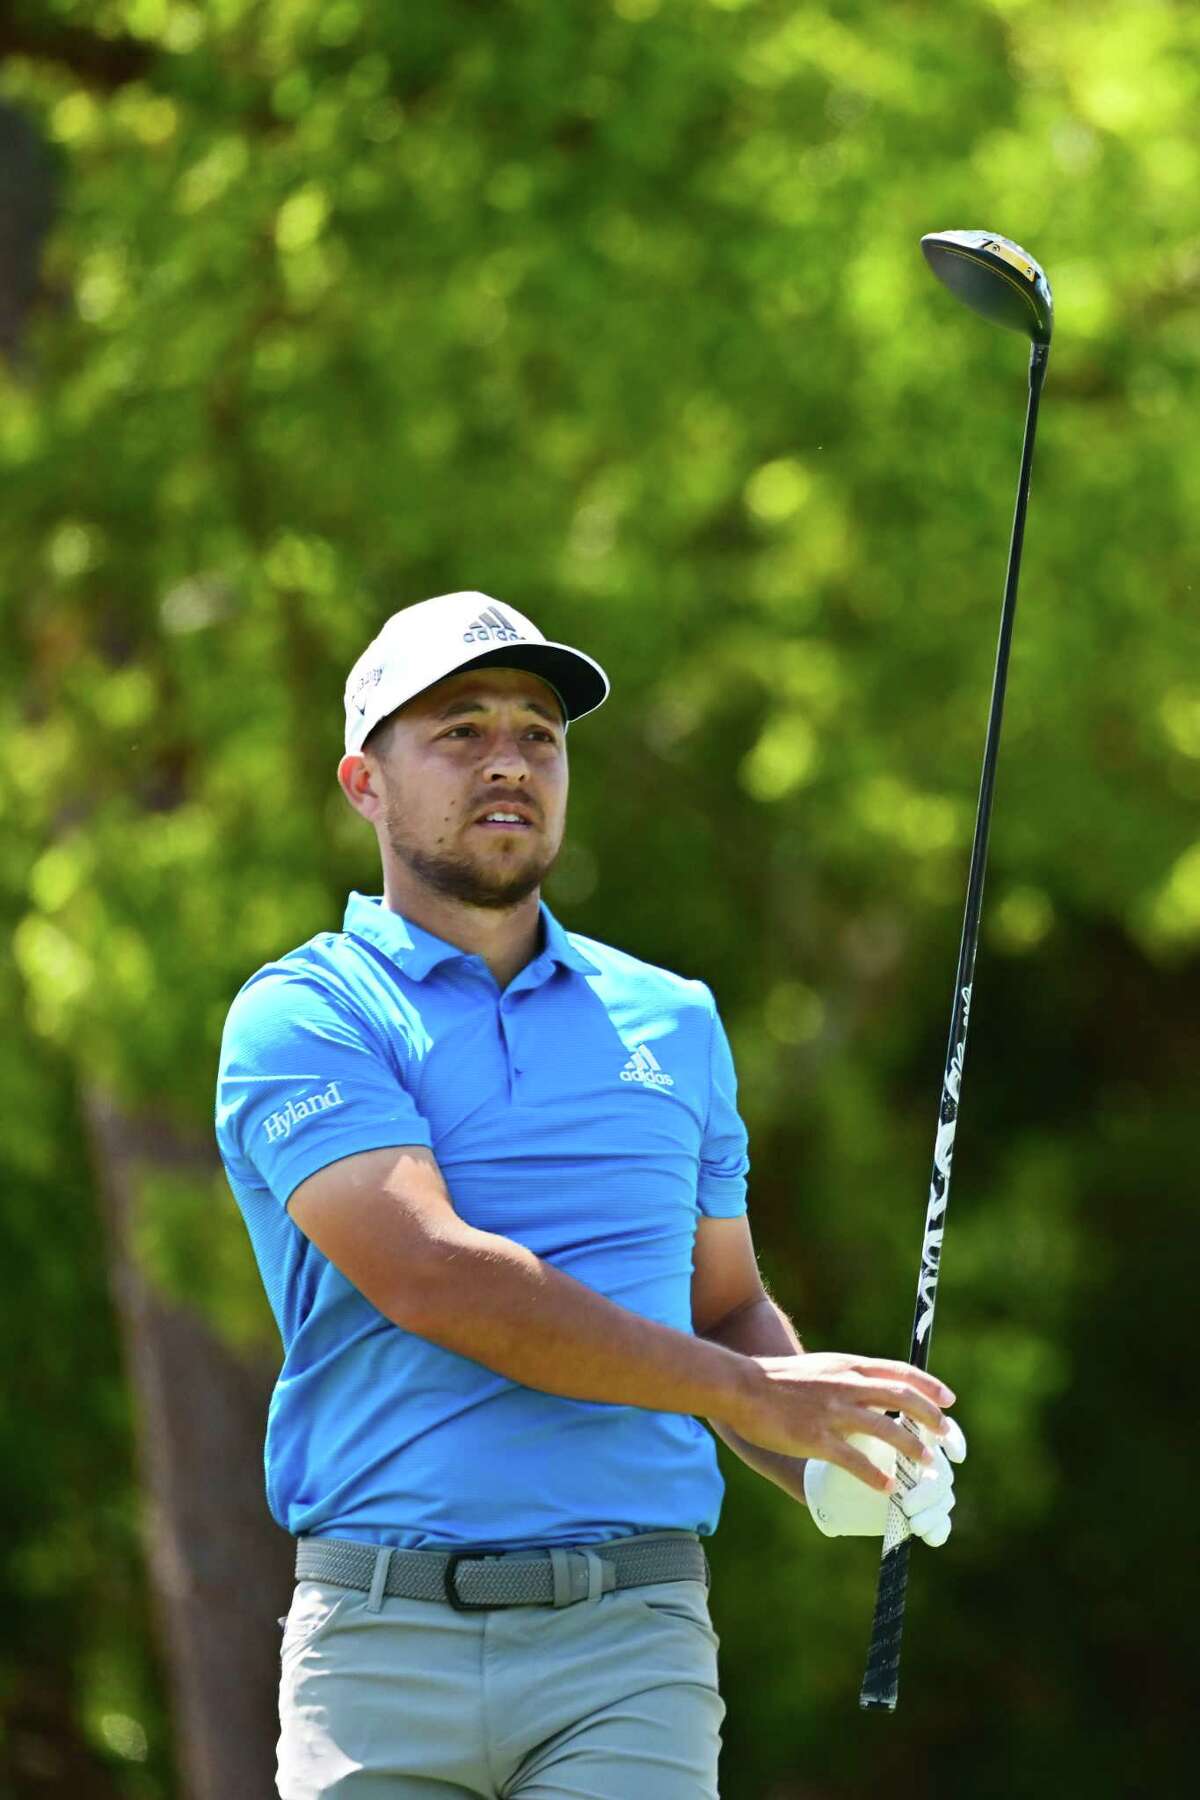 Xander Schauffele plays his shot from the first tee during the final round of the Valspar Championship on Sunday. Schauffele will play in the Travelers Championship in June.